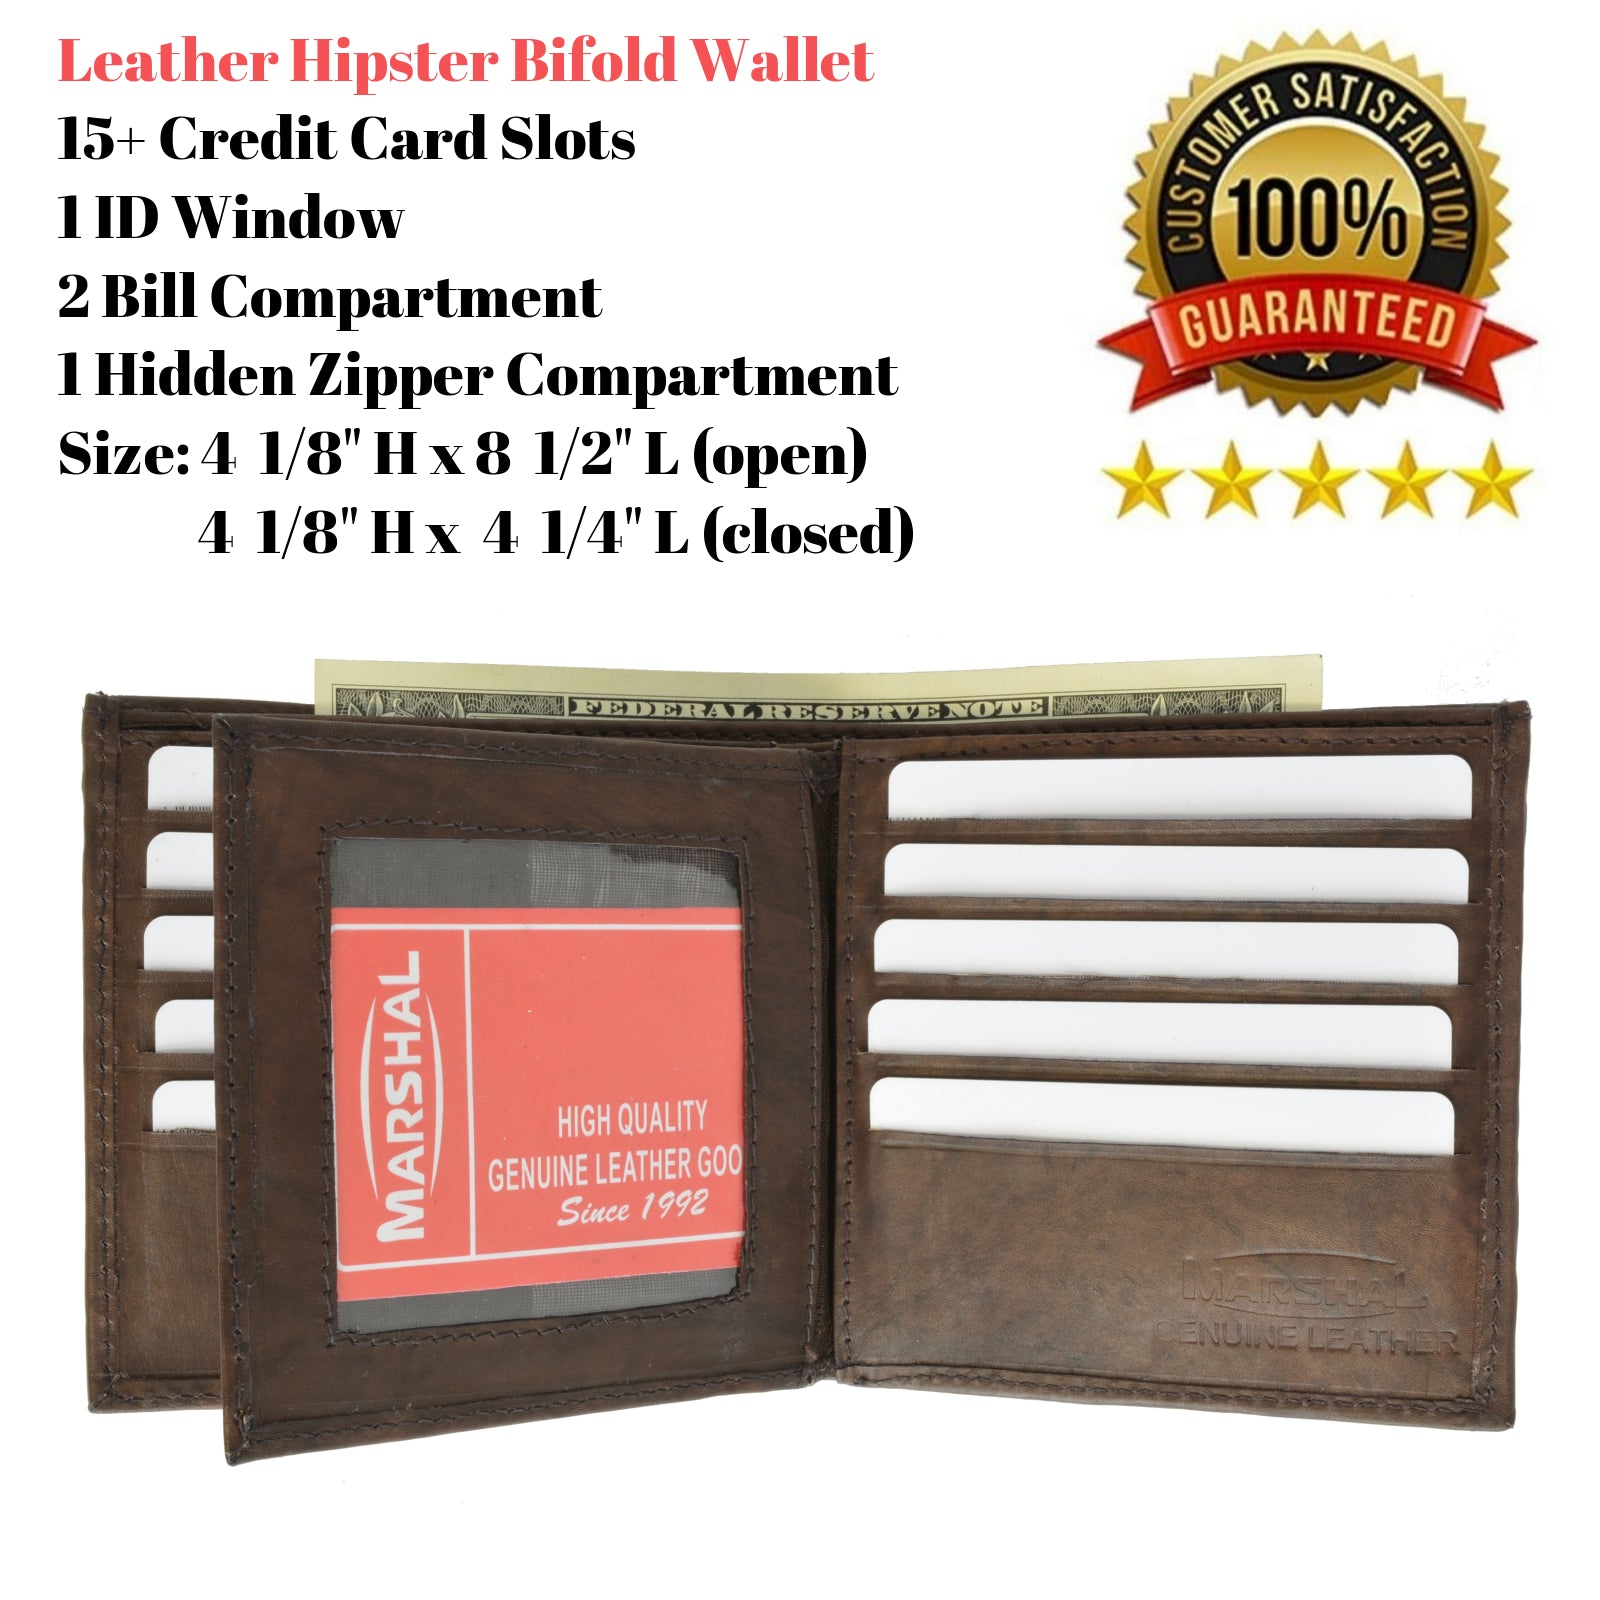 European Hipster Mens Wallet Thick Large Bifold 20 Cards and 2 ID